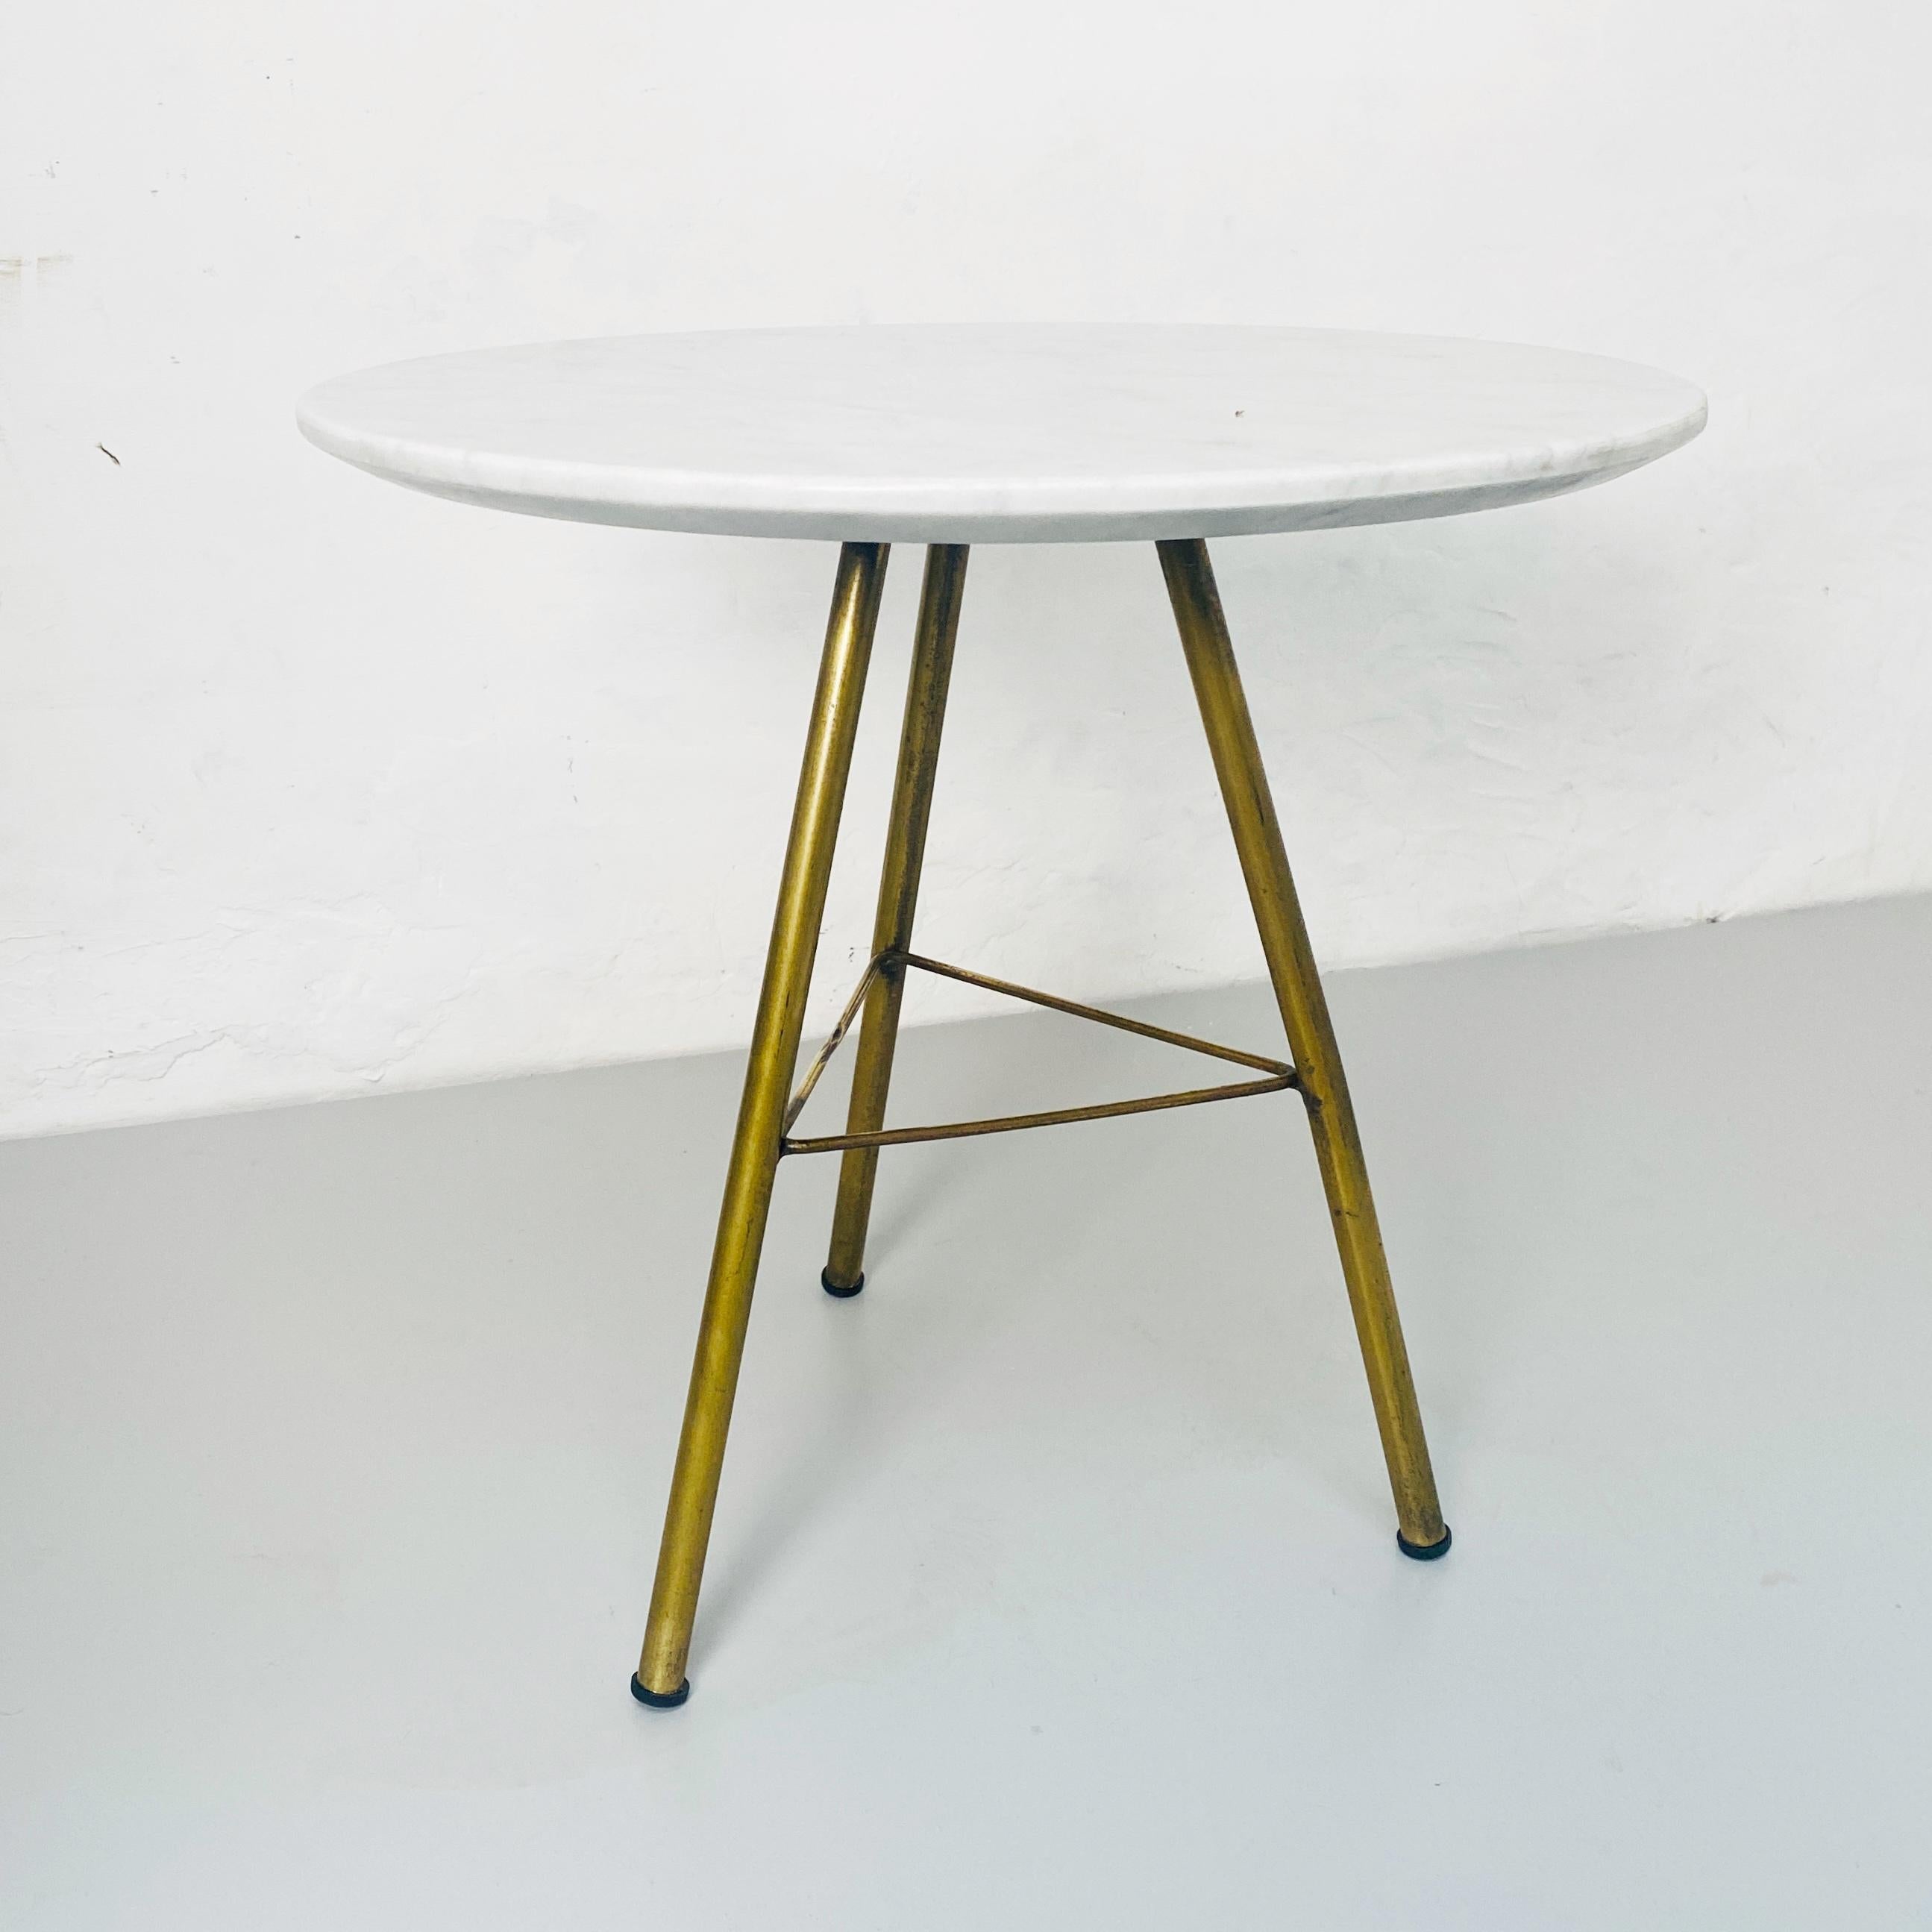 Italian Mid-Century Modern Round Marble and Brass Coffee Table, 1960s 2